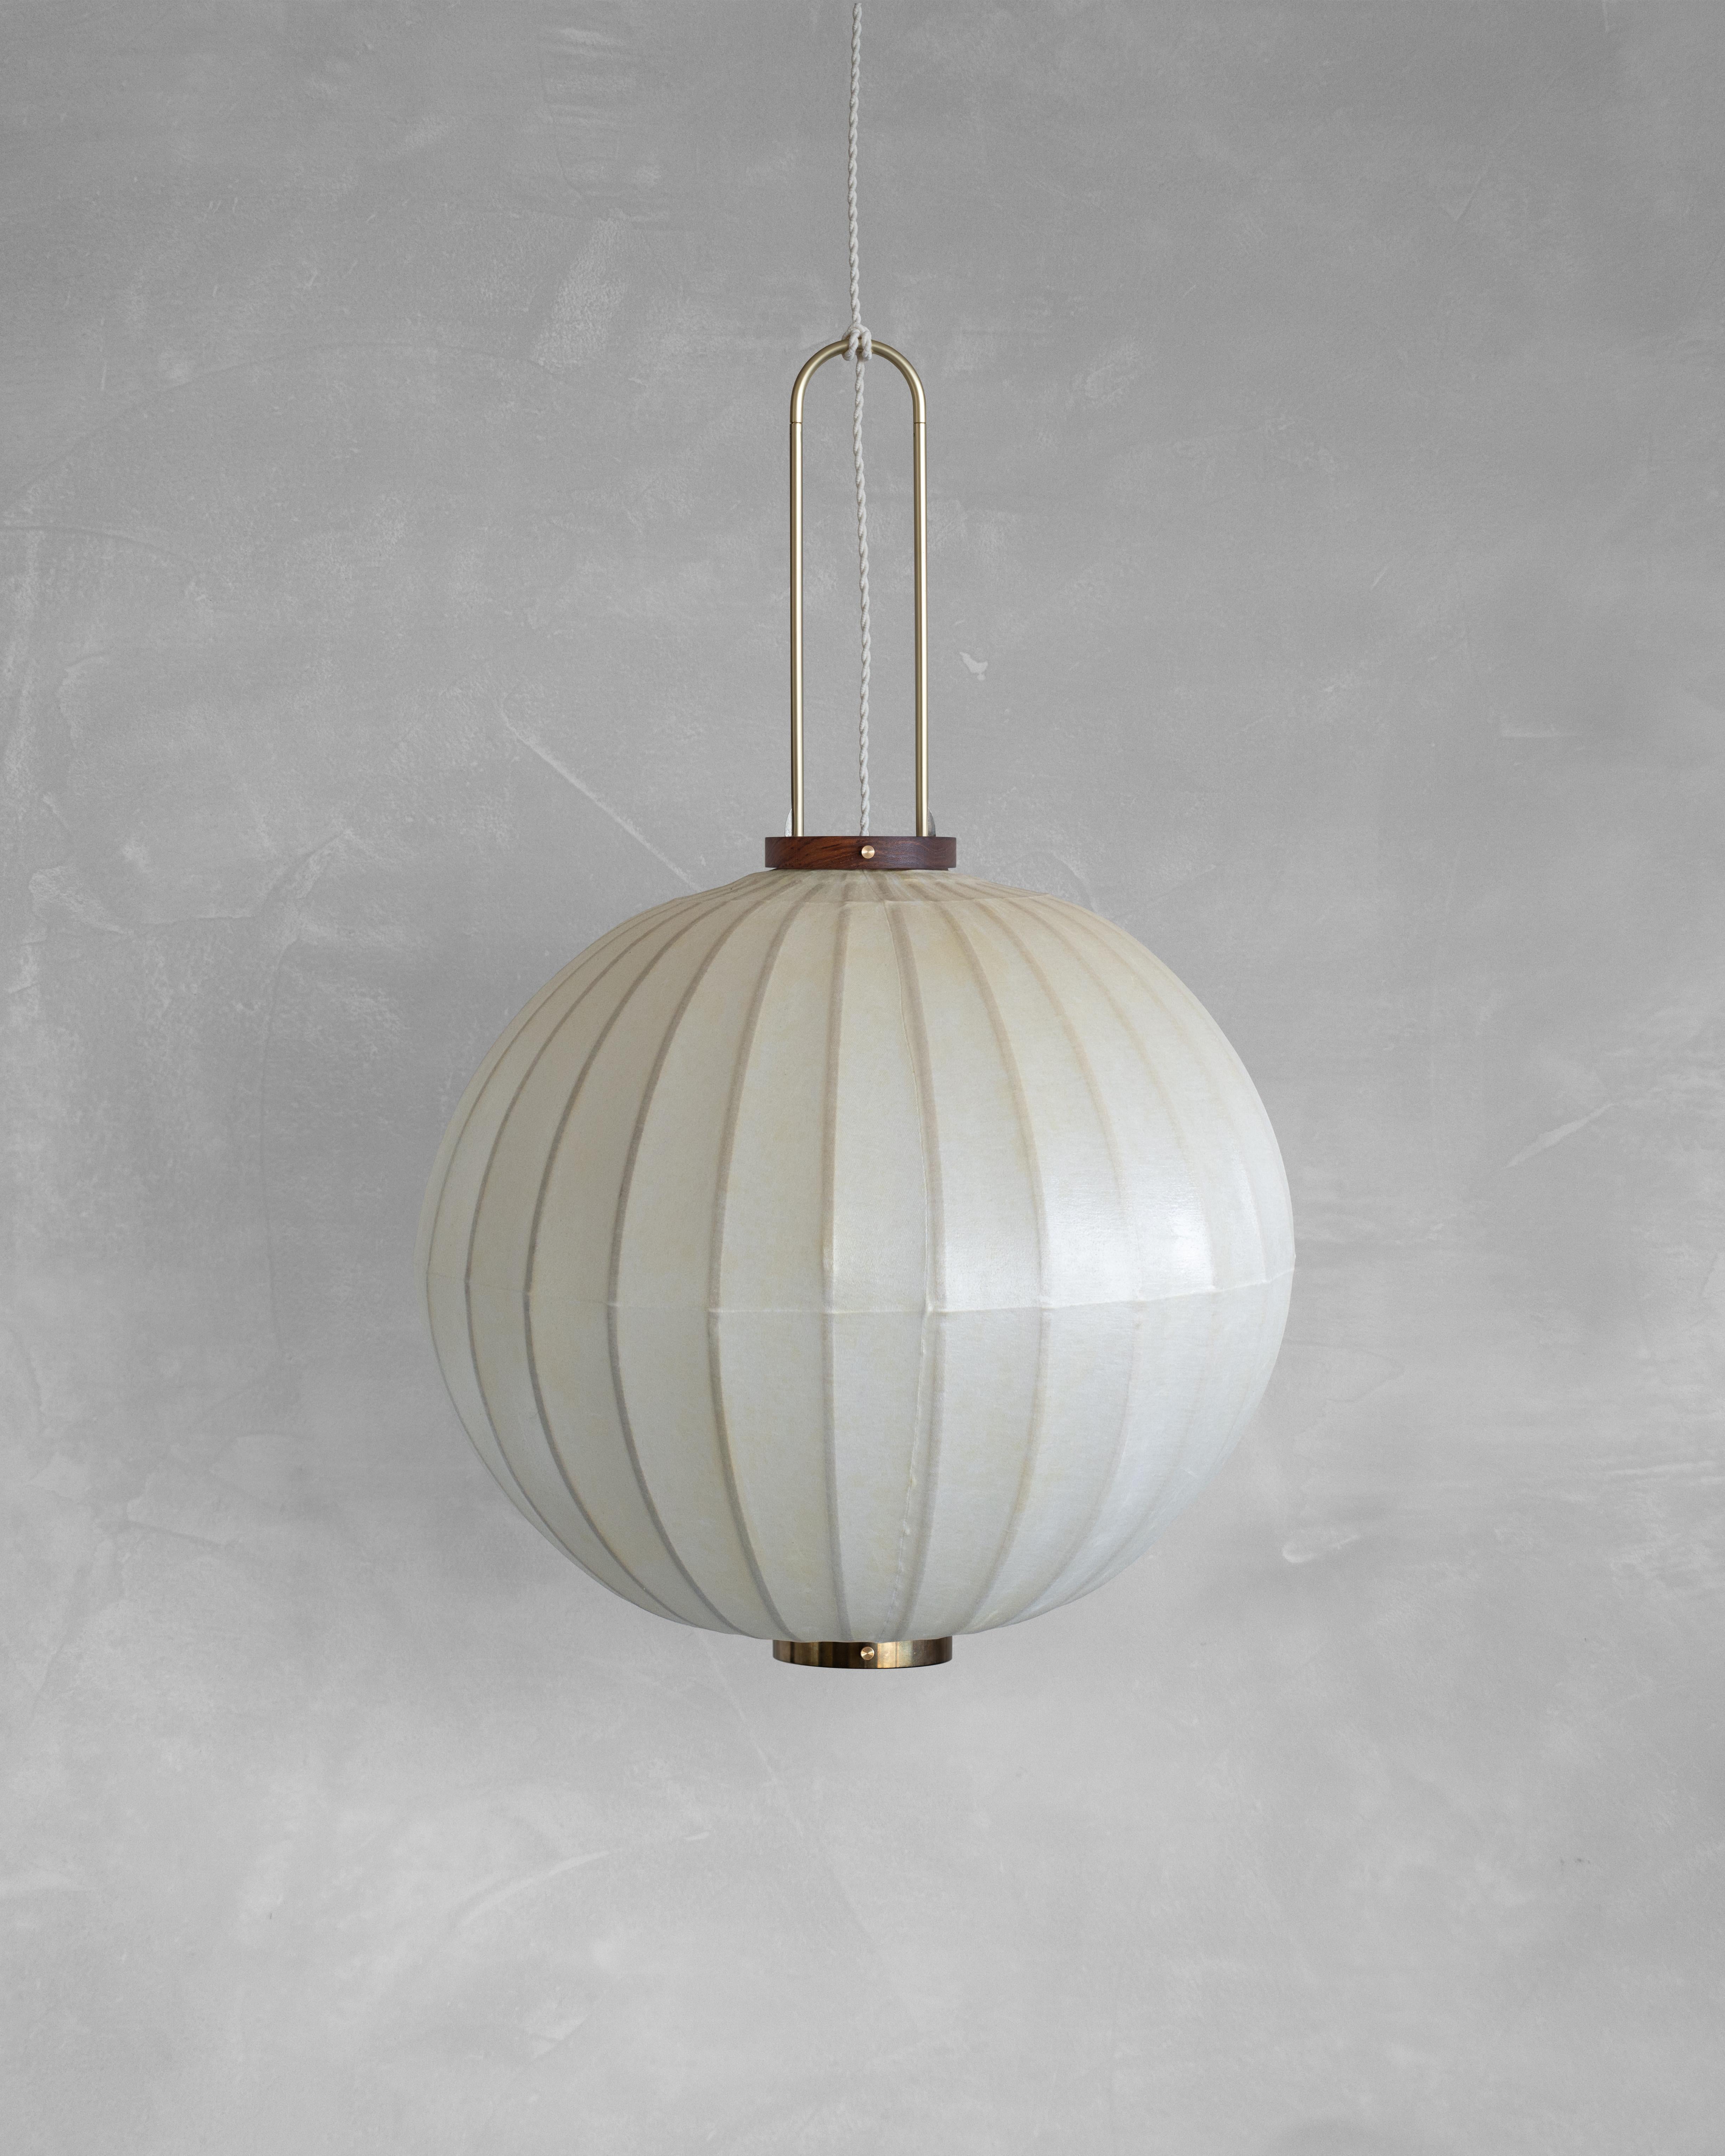 HU02M Pendant Lamp L by Taiwan Lantern
Dimensions: D 57 x W 57 x H 50 cm.
Material: Walnut & bamboo frame, Hand-colored fabrics, Metal pipes, Leather lace, Handmade porcelain ceiling cap.


This brown color is inspired by Wu Xing 五行. Brown presents